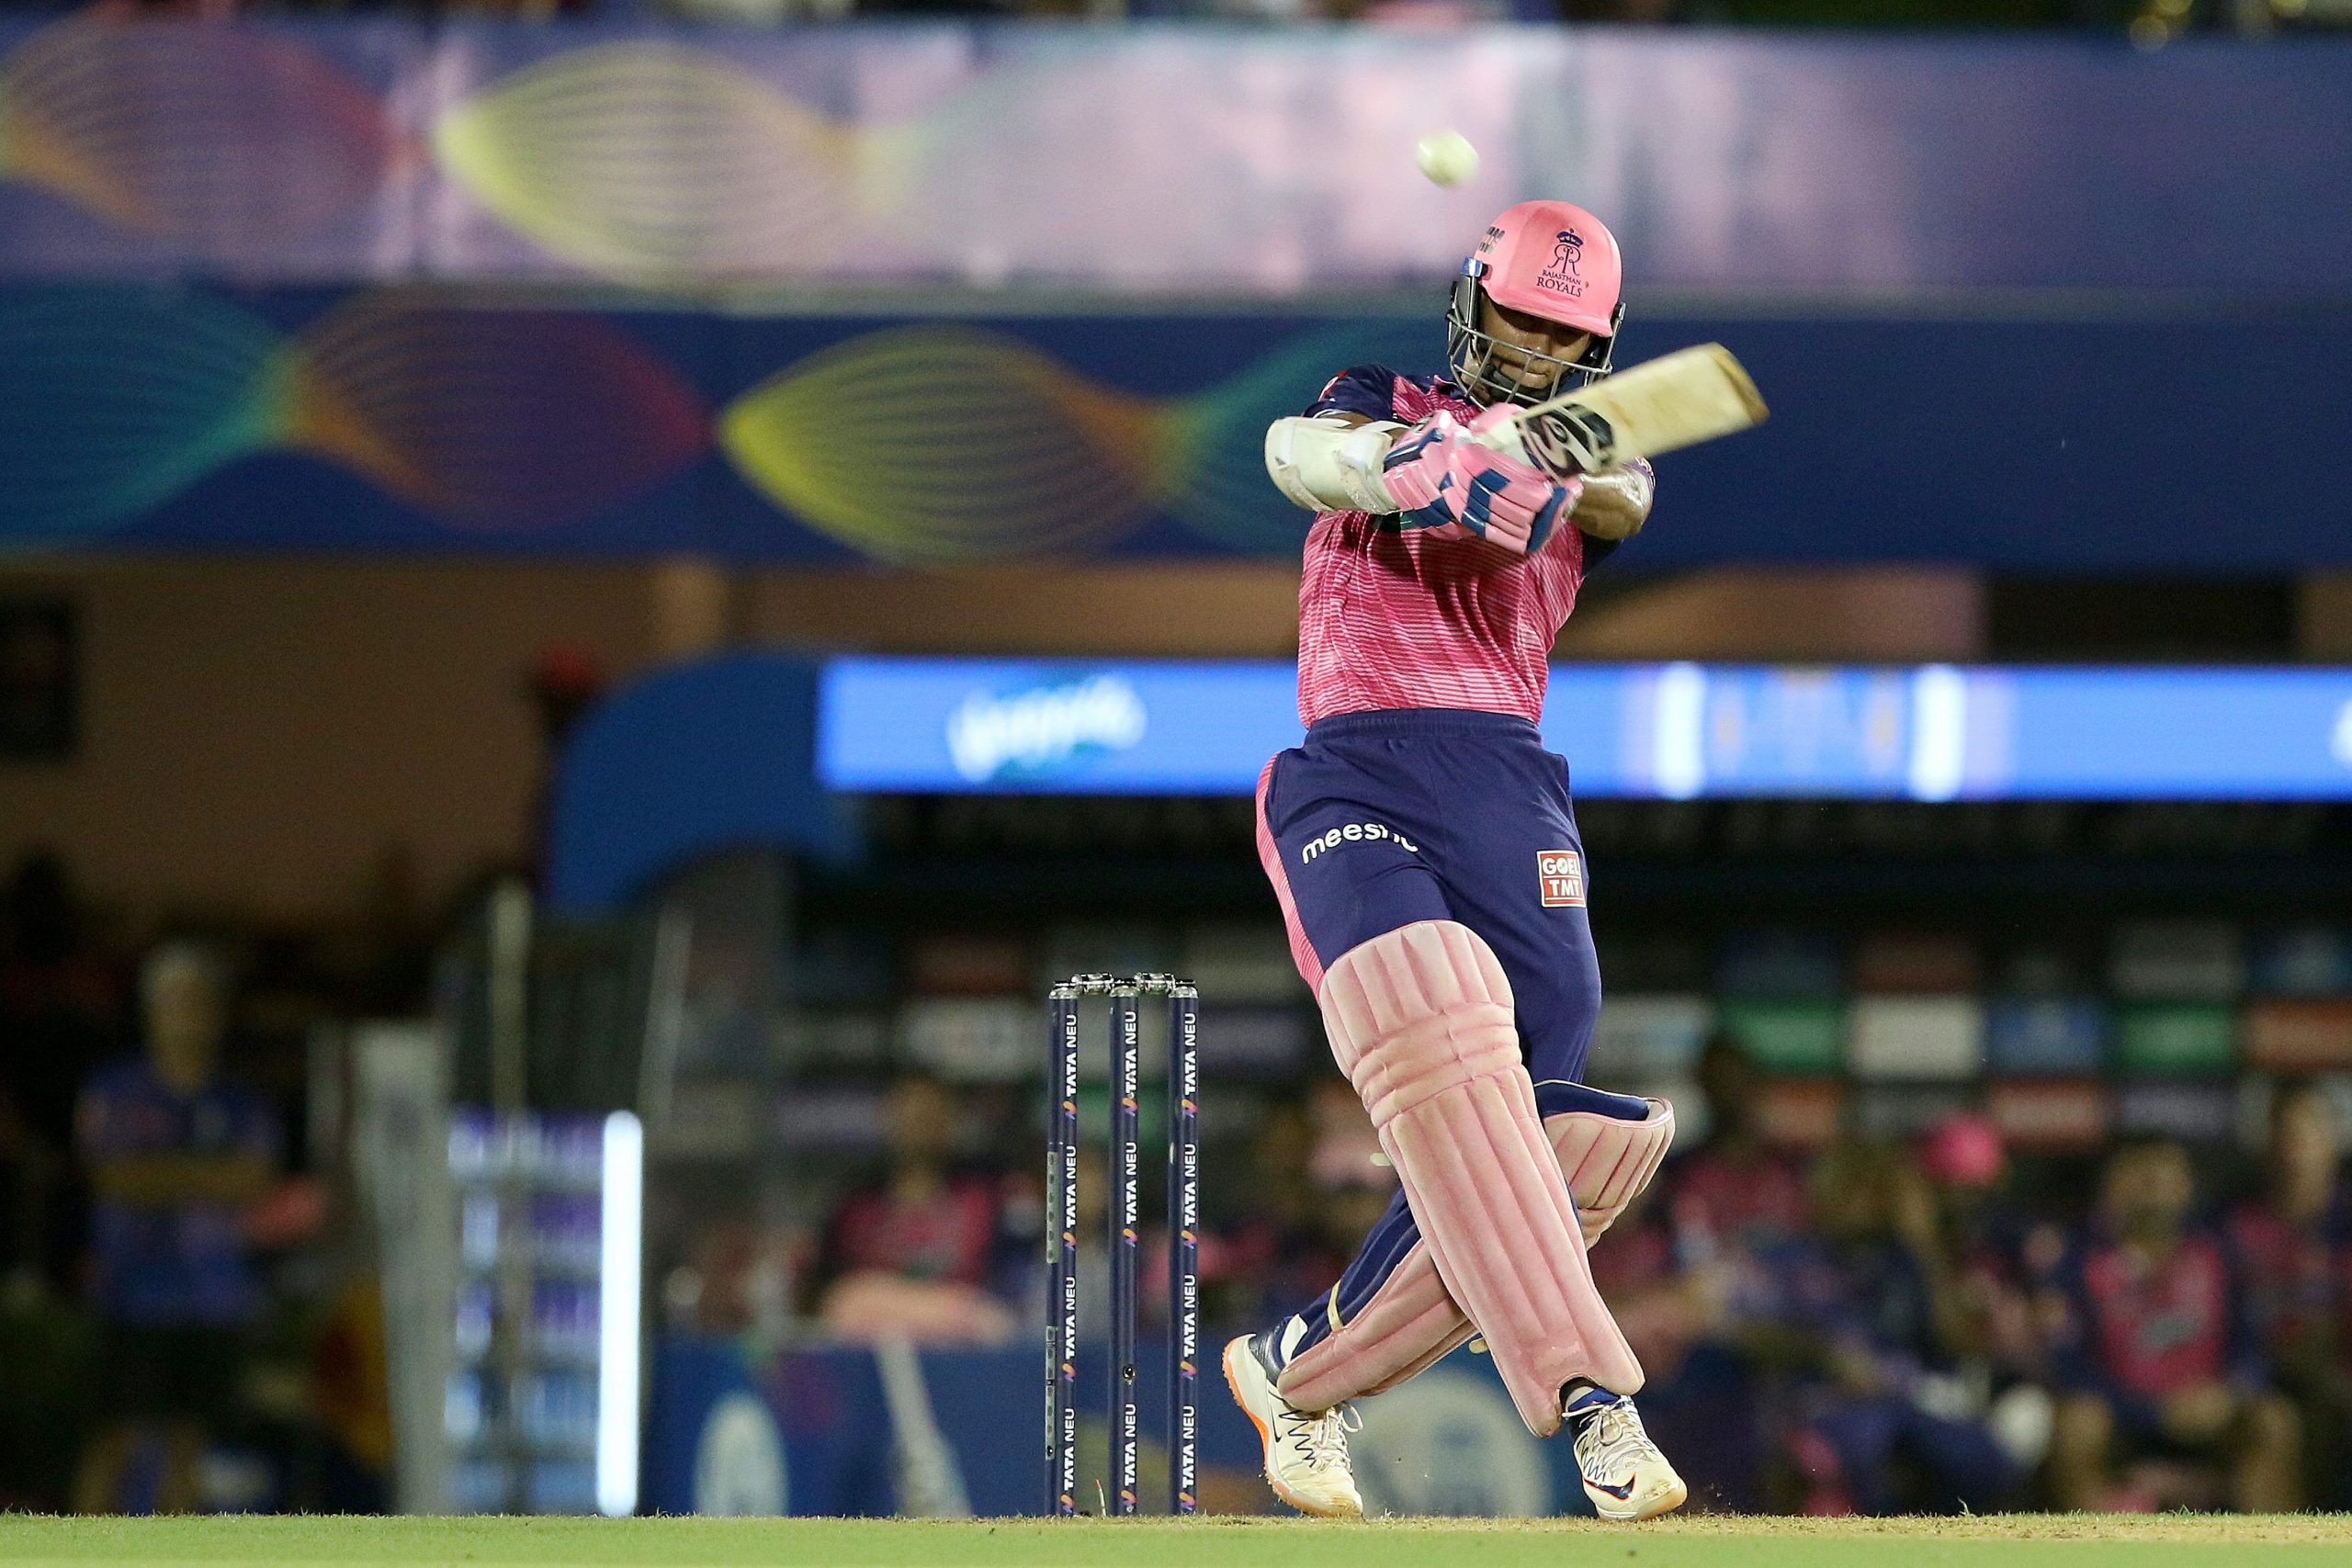 IPL 2022: RR beat CSK by 5 wickets to secure play-off berth